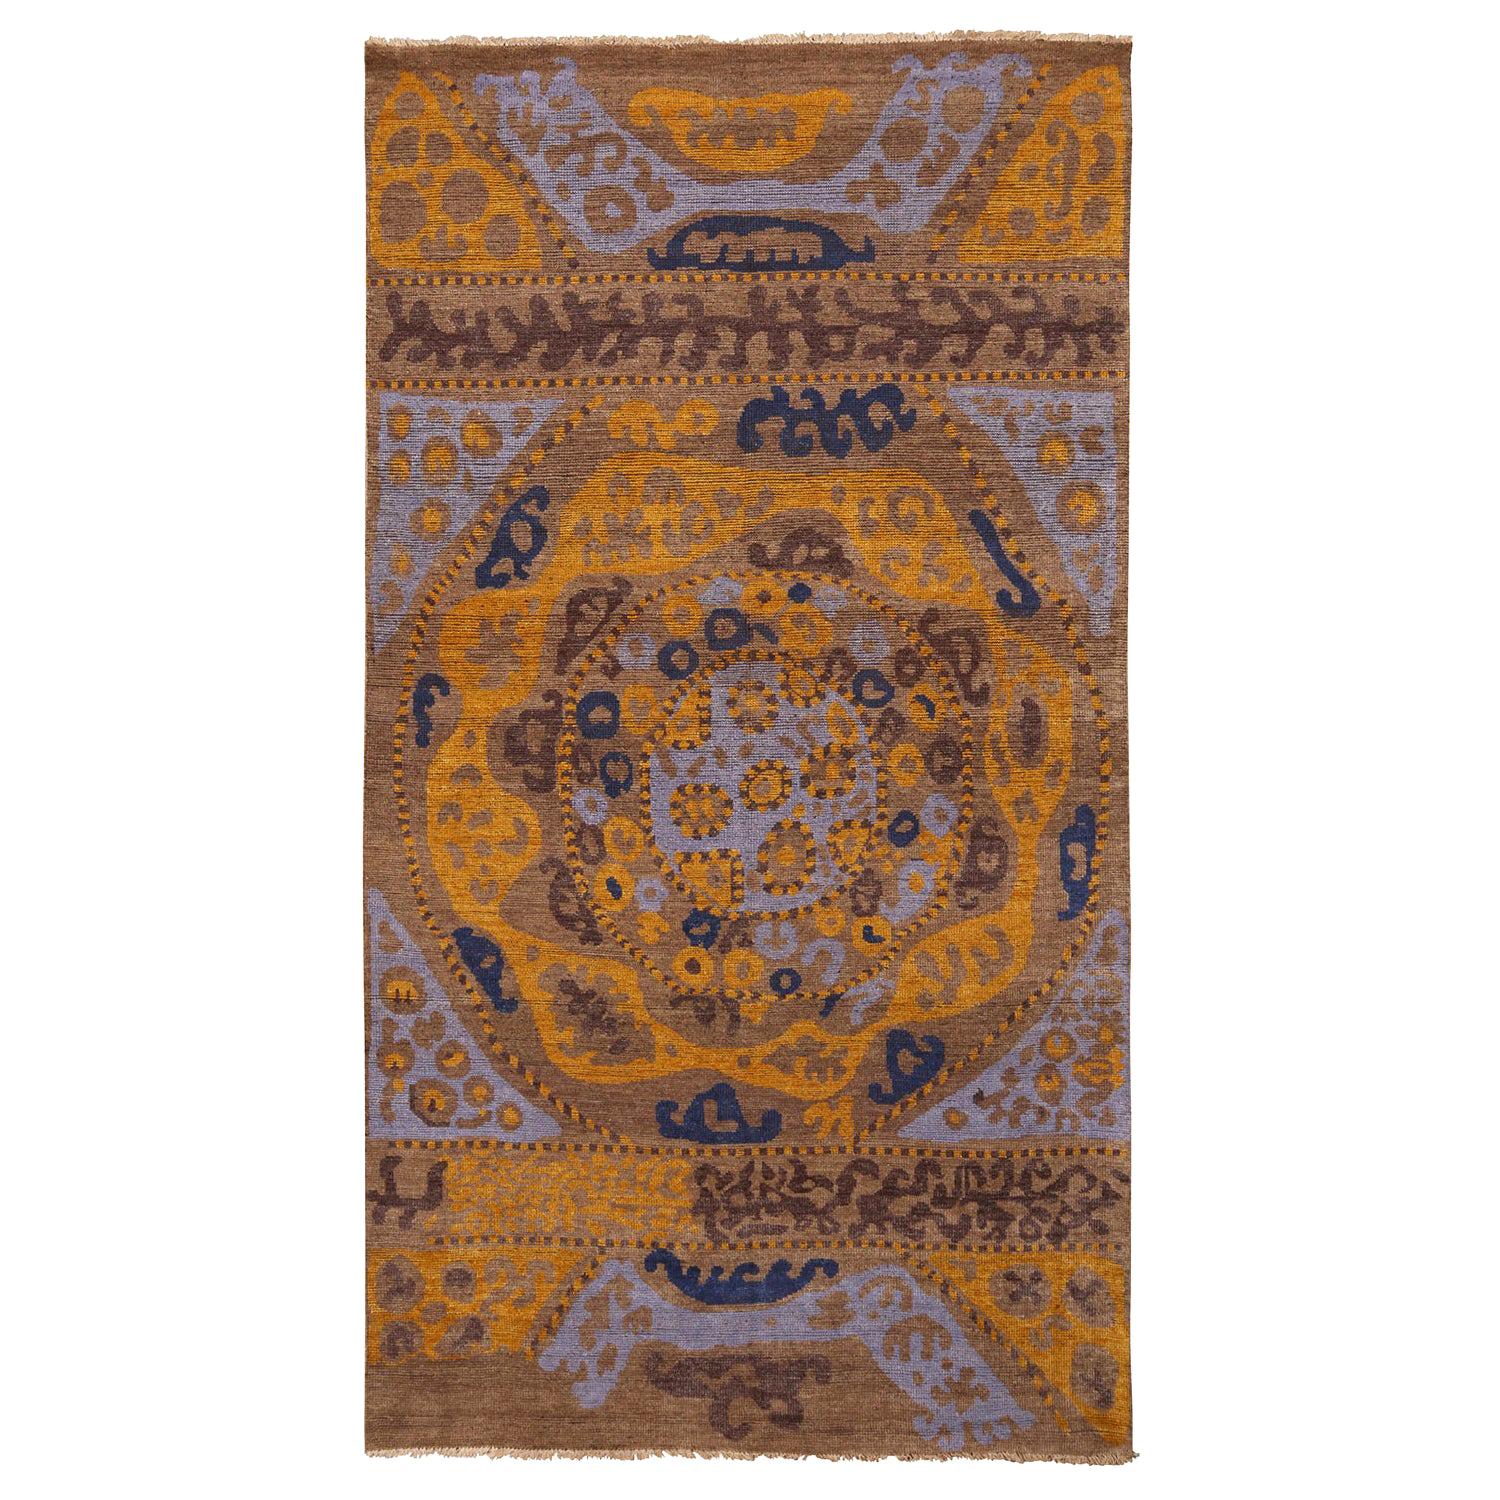 Rug & Kilim's 19th-Century Azerbaijan Embroidery Style Beige Gold and Blue Rug